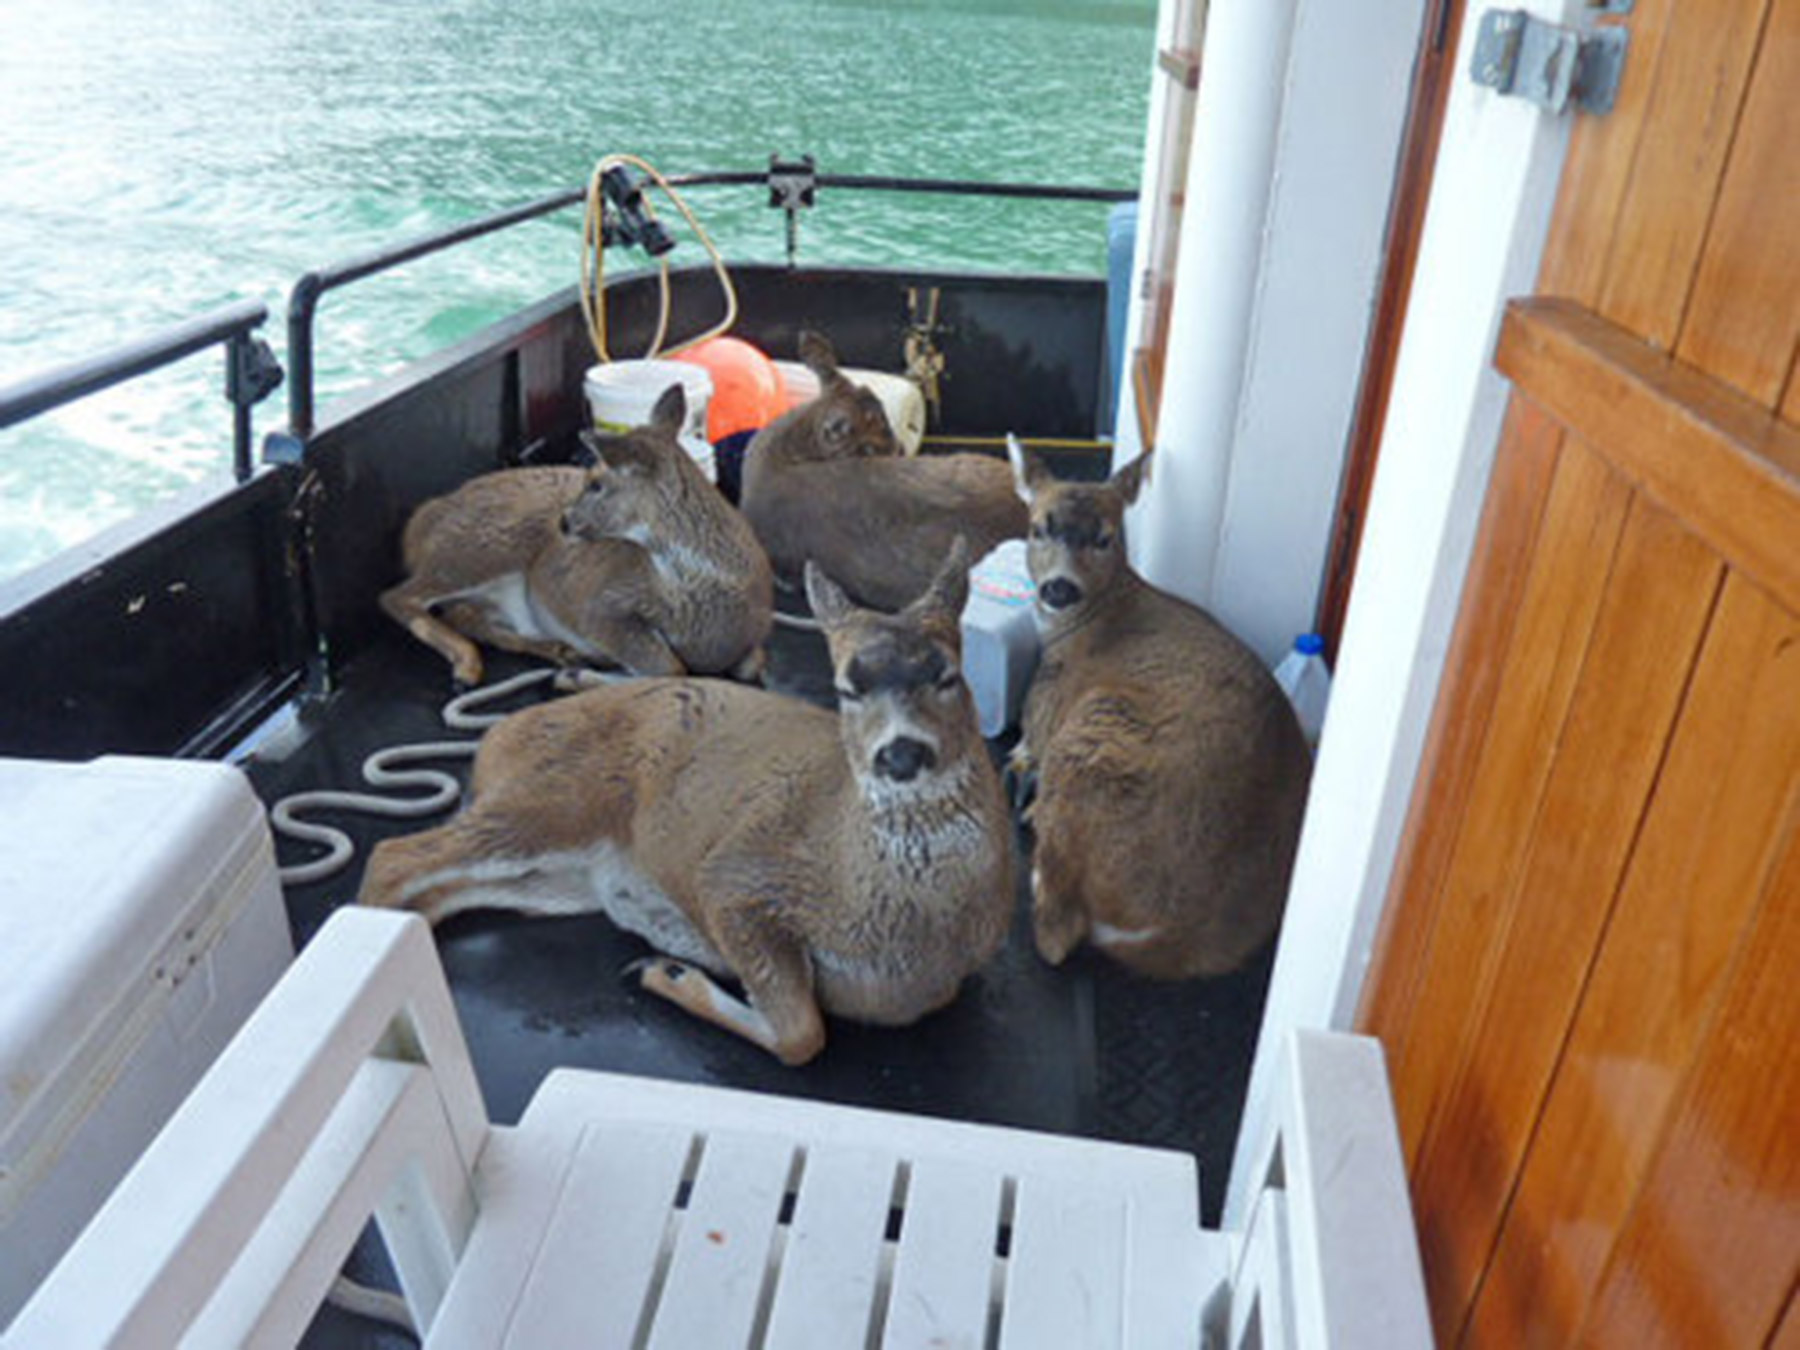 Rescued deer in the back of the boat